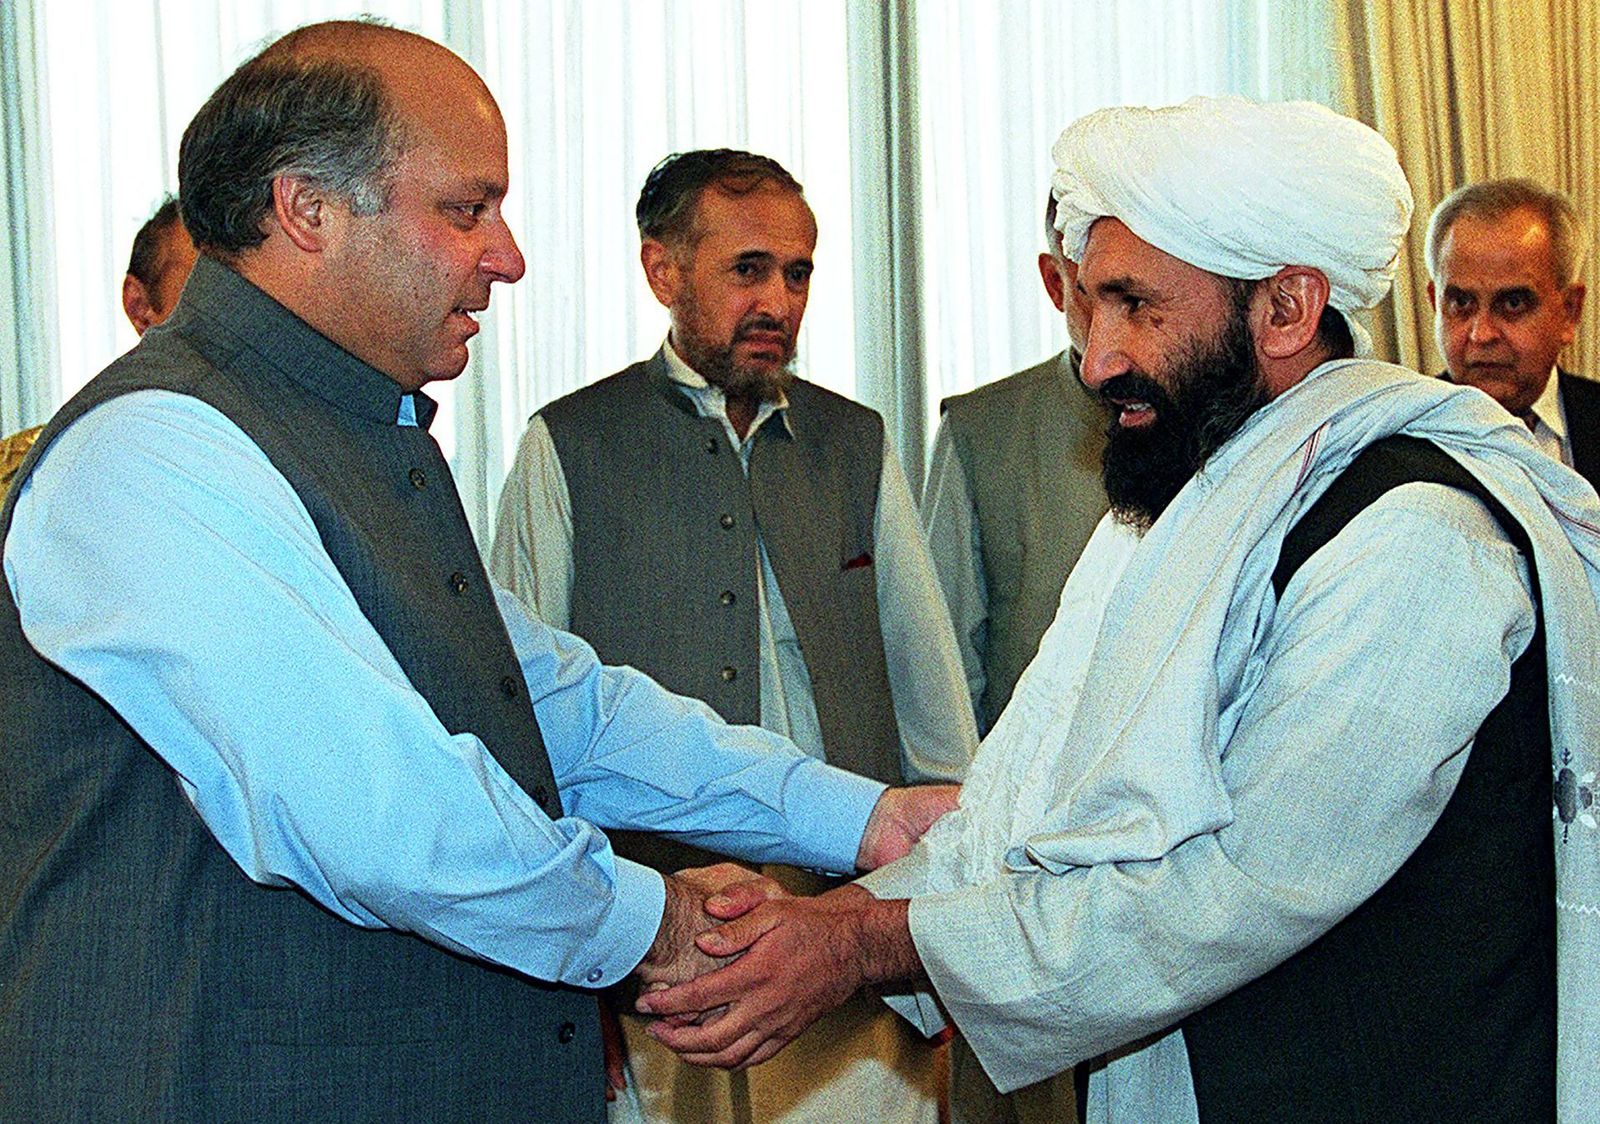 (FILES) In this file photo taken on August 26, 1999 Pakistani Prime Minister Nawaz Sharif receives Afghan Foreign Minister Mullah Mohammad Hassan Akhund (R) in Islamabad. - The Taliban announced Mullah Mohammad Hasan Akhund as the leader of their new government in Afghanistan on September 7, 2021. (Photo by SAEED KHAN / AFP) - AFP